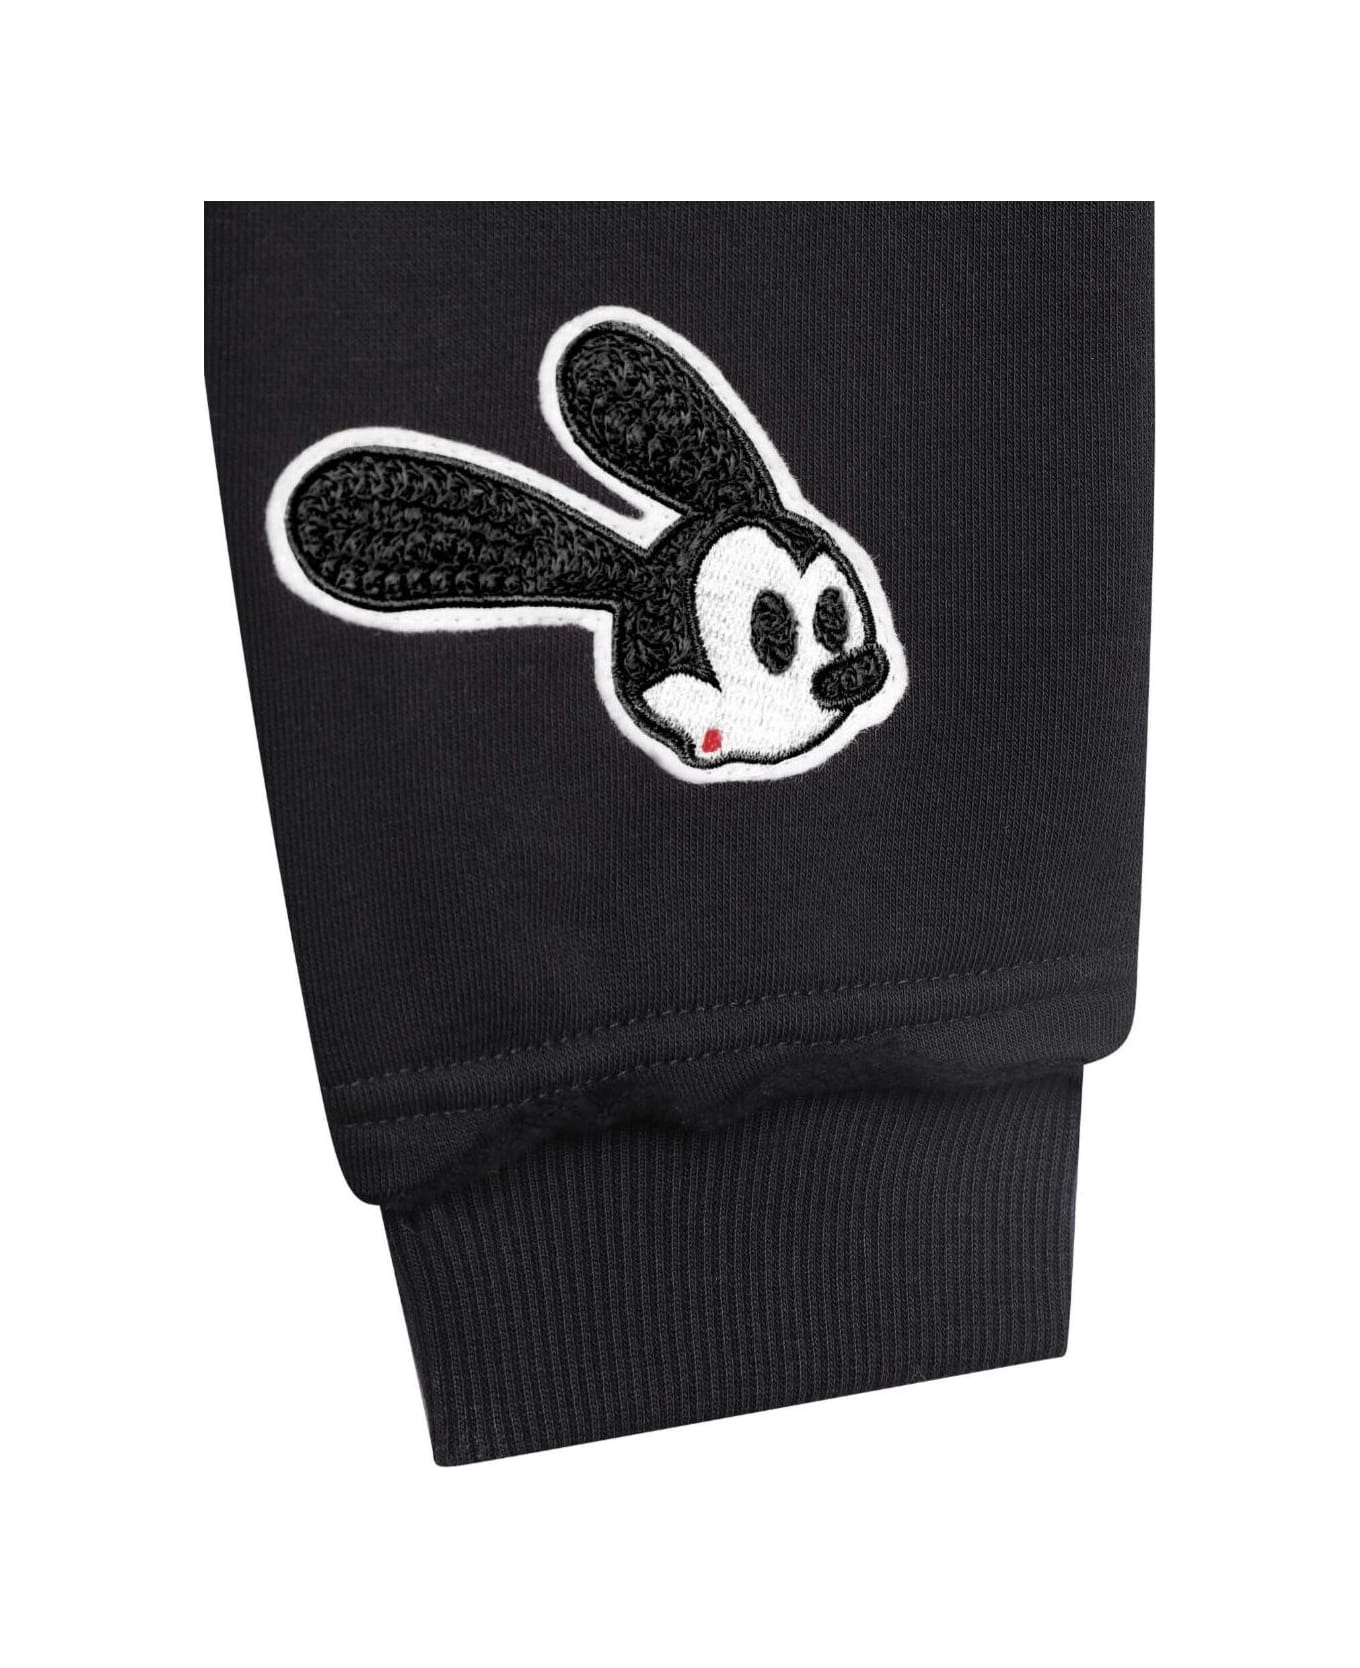 Givenchy Black Track Pants With 'oswald X Disney' Patch In Cotton Blend Girl - Black